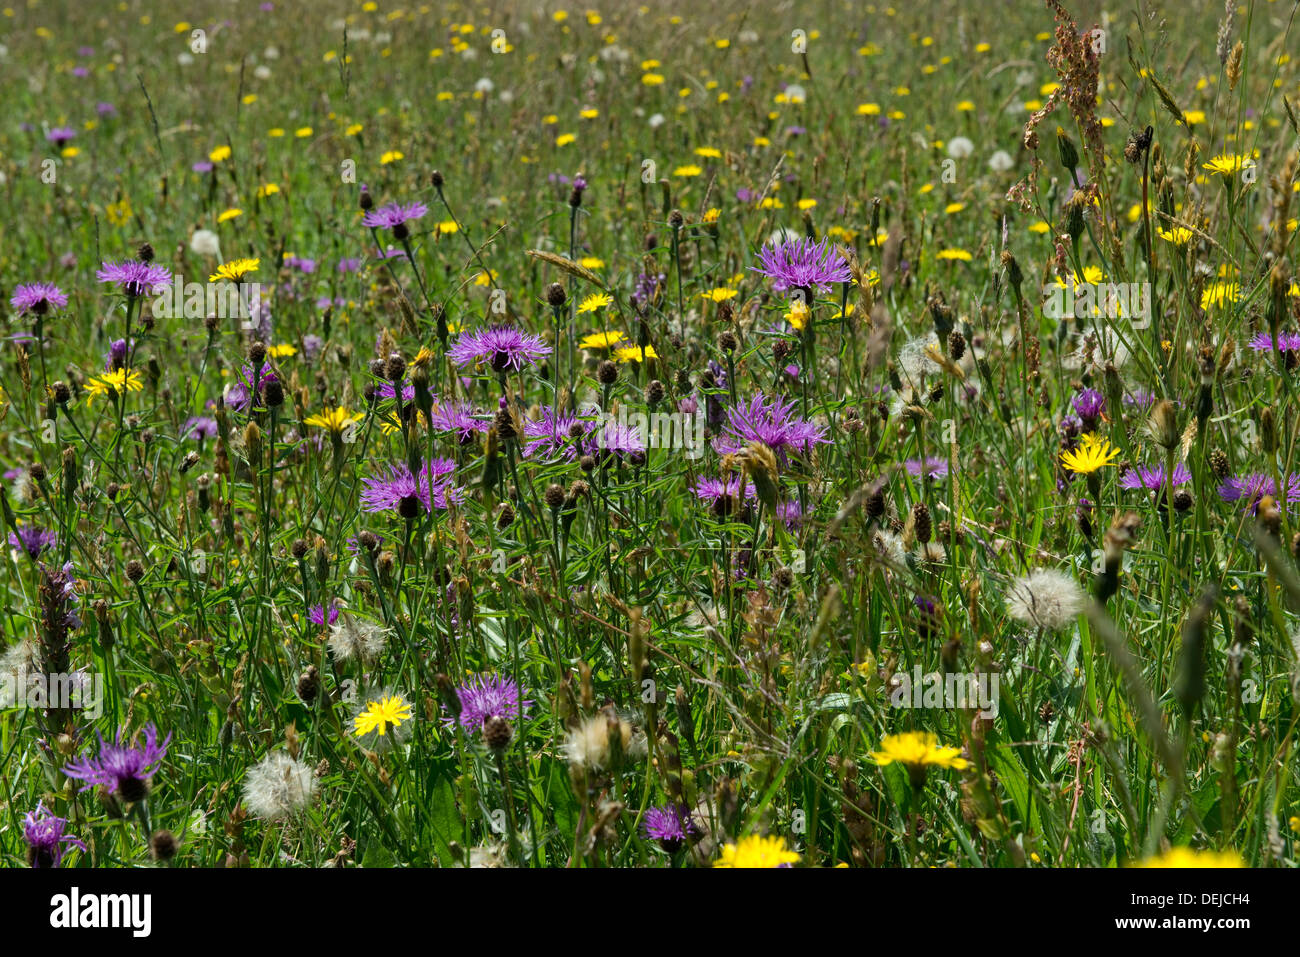 Greater knapweed, Centaurea scabiosa, flowering with other plants in a flower meadow Stock Photo